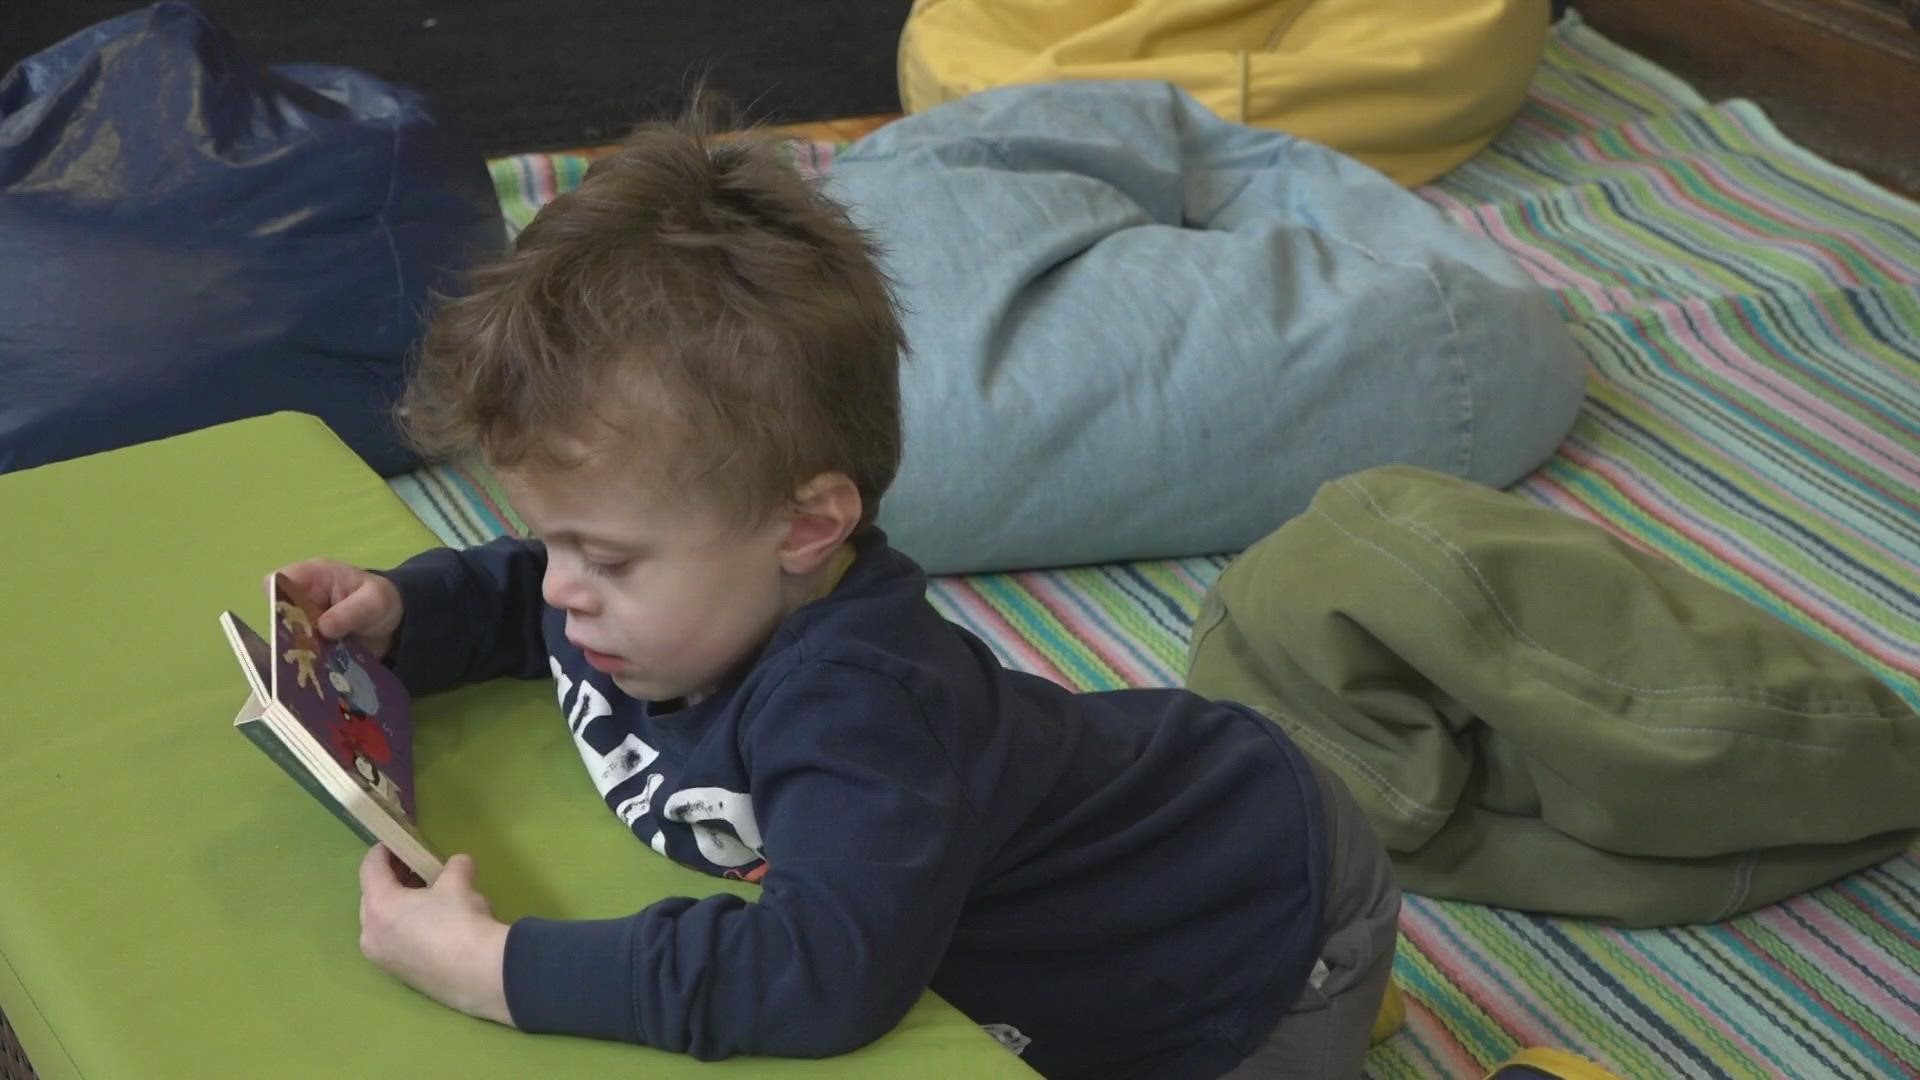 The Children's Nursery School in Portland held its first in-person event over the weekend since the pandemic began to help raise money for their nonprofit school.